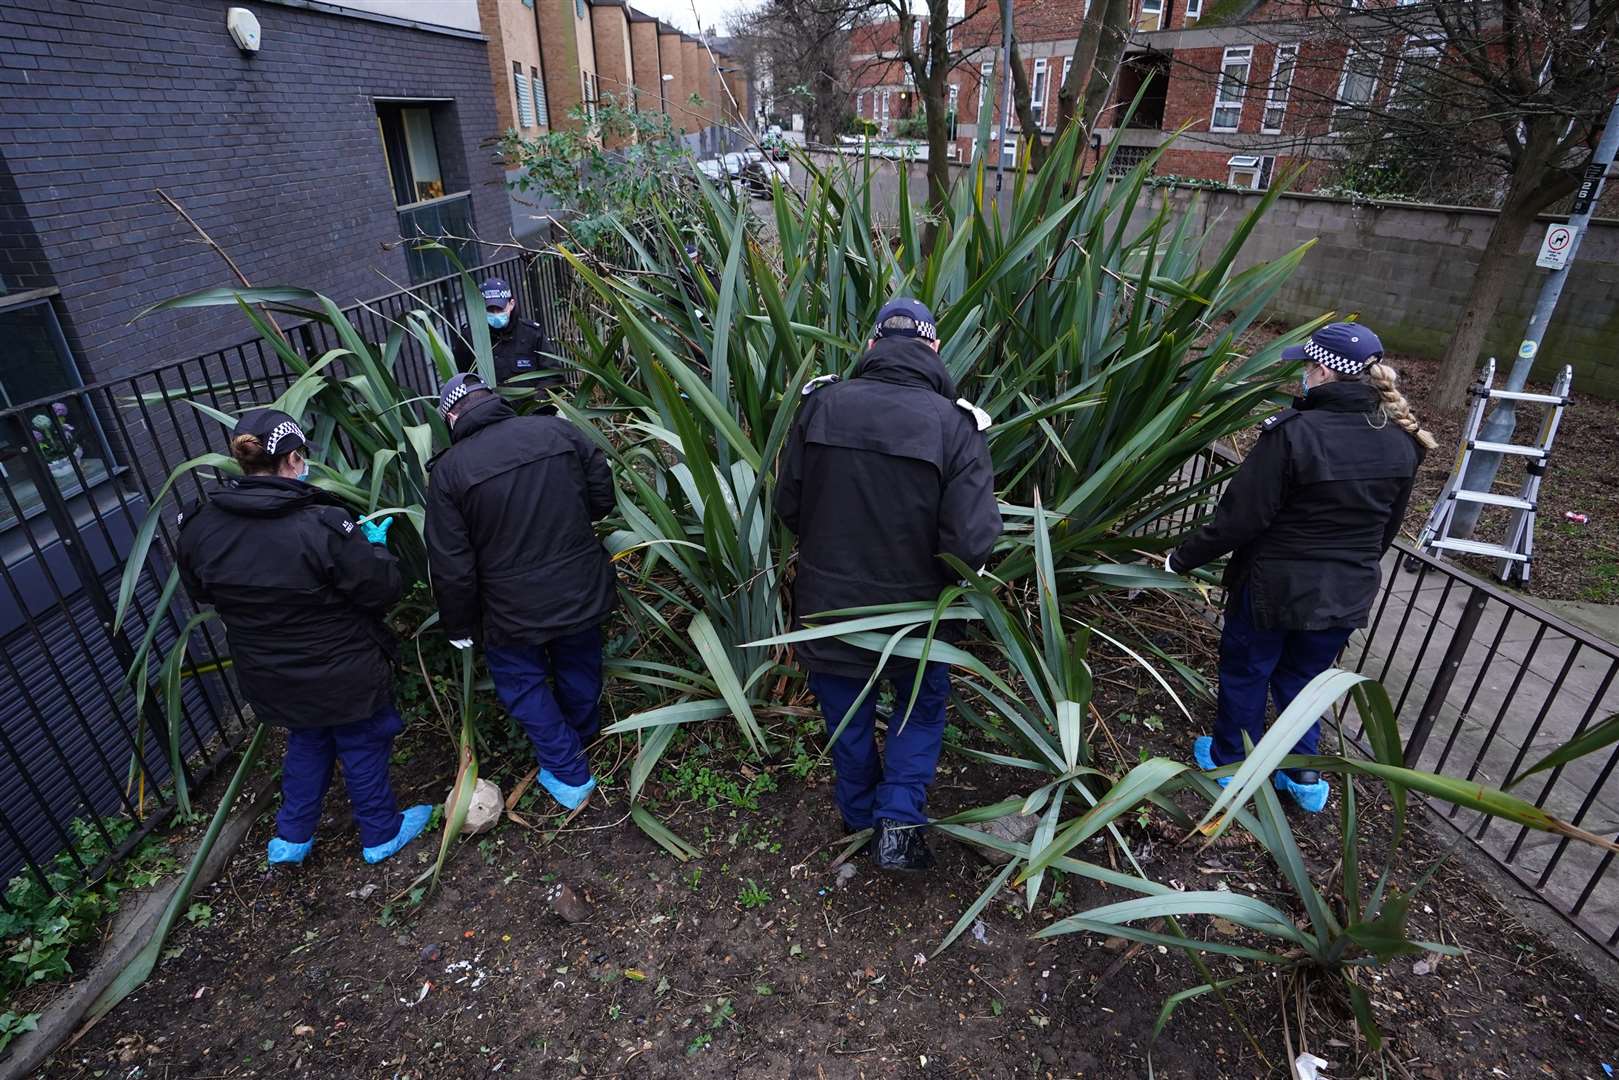 Police carried out investigations at the Abbey estate near St John’s Wood in north-west London (James Manning/PA)